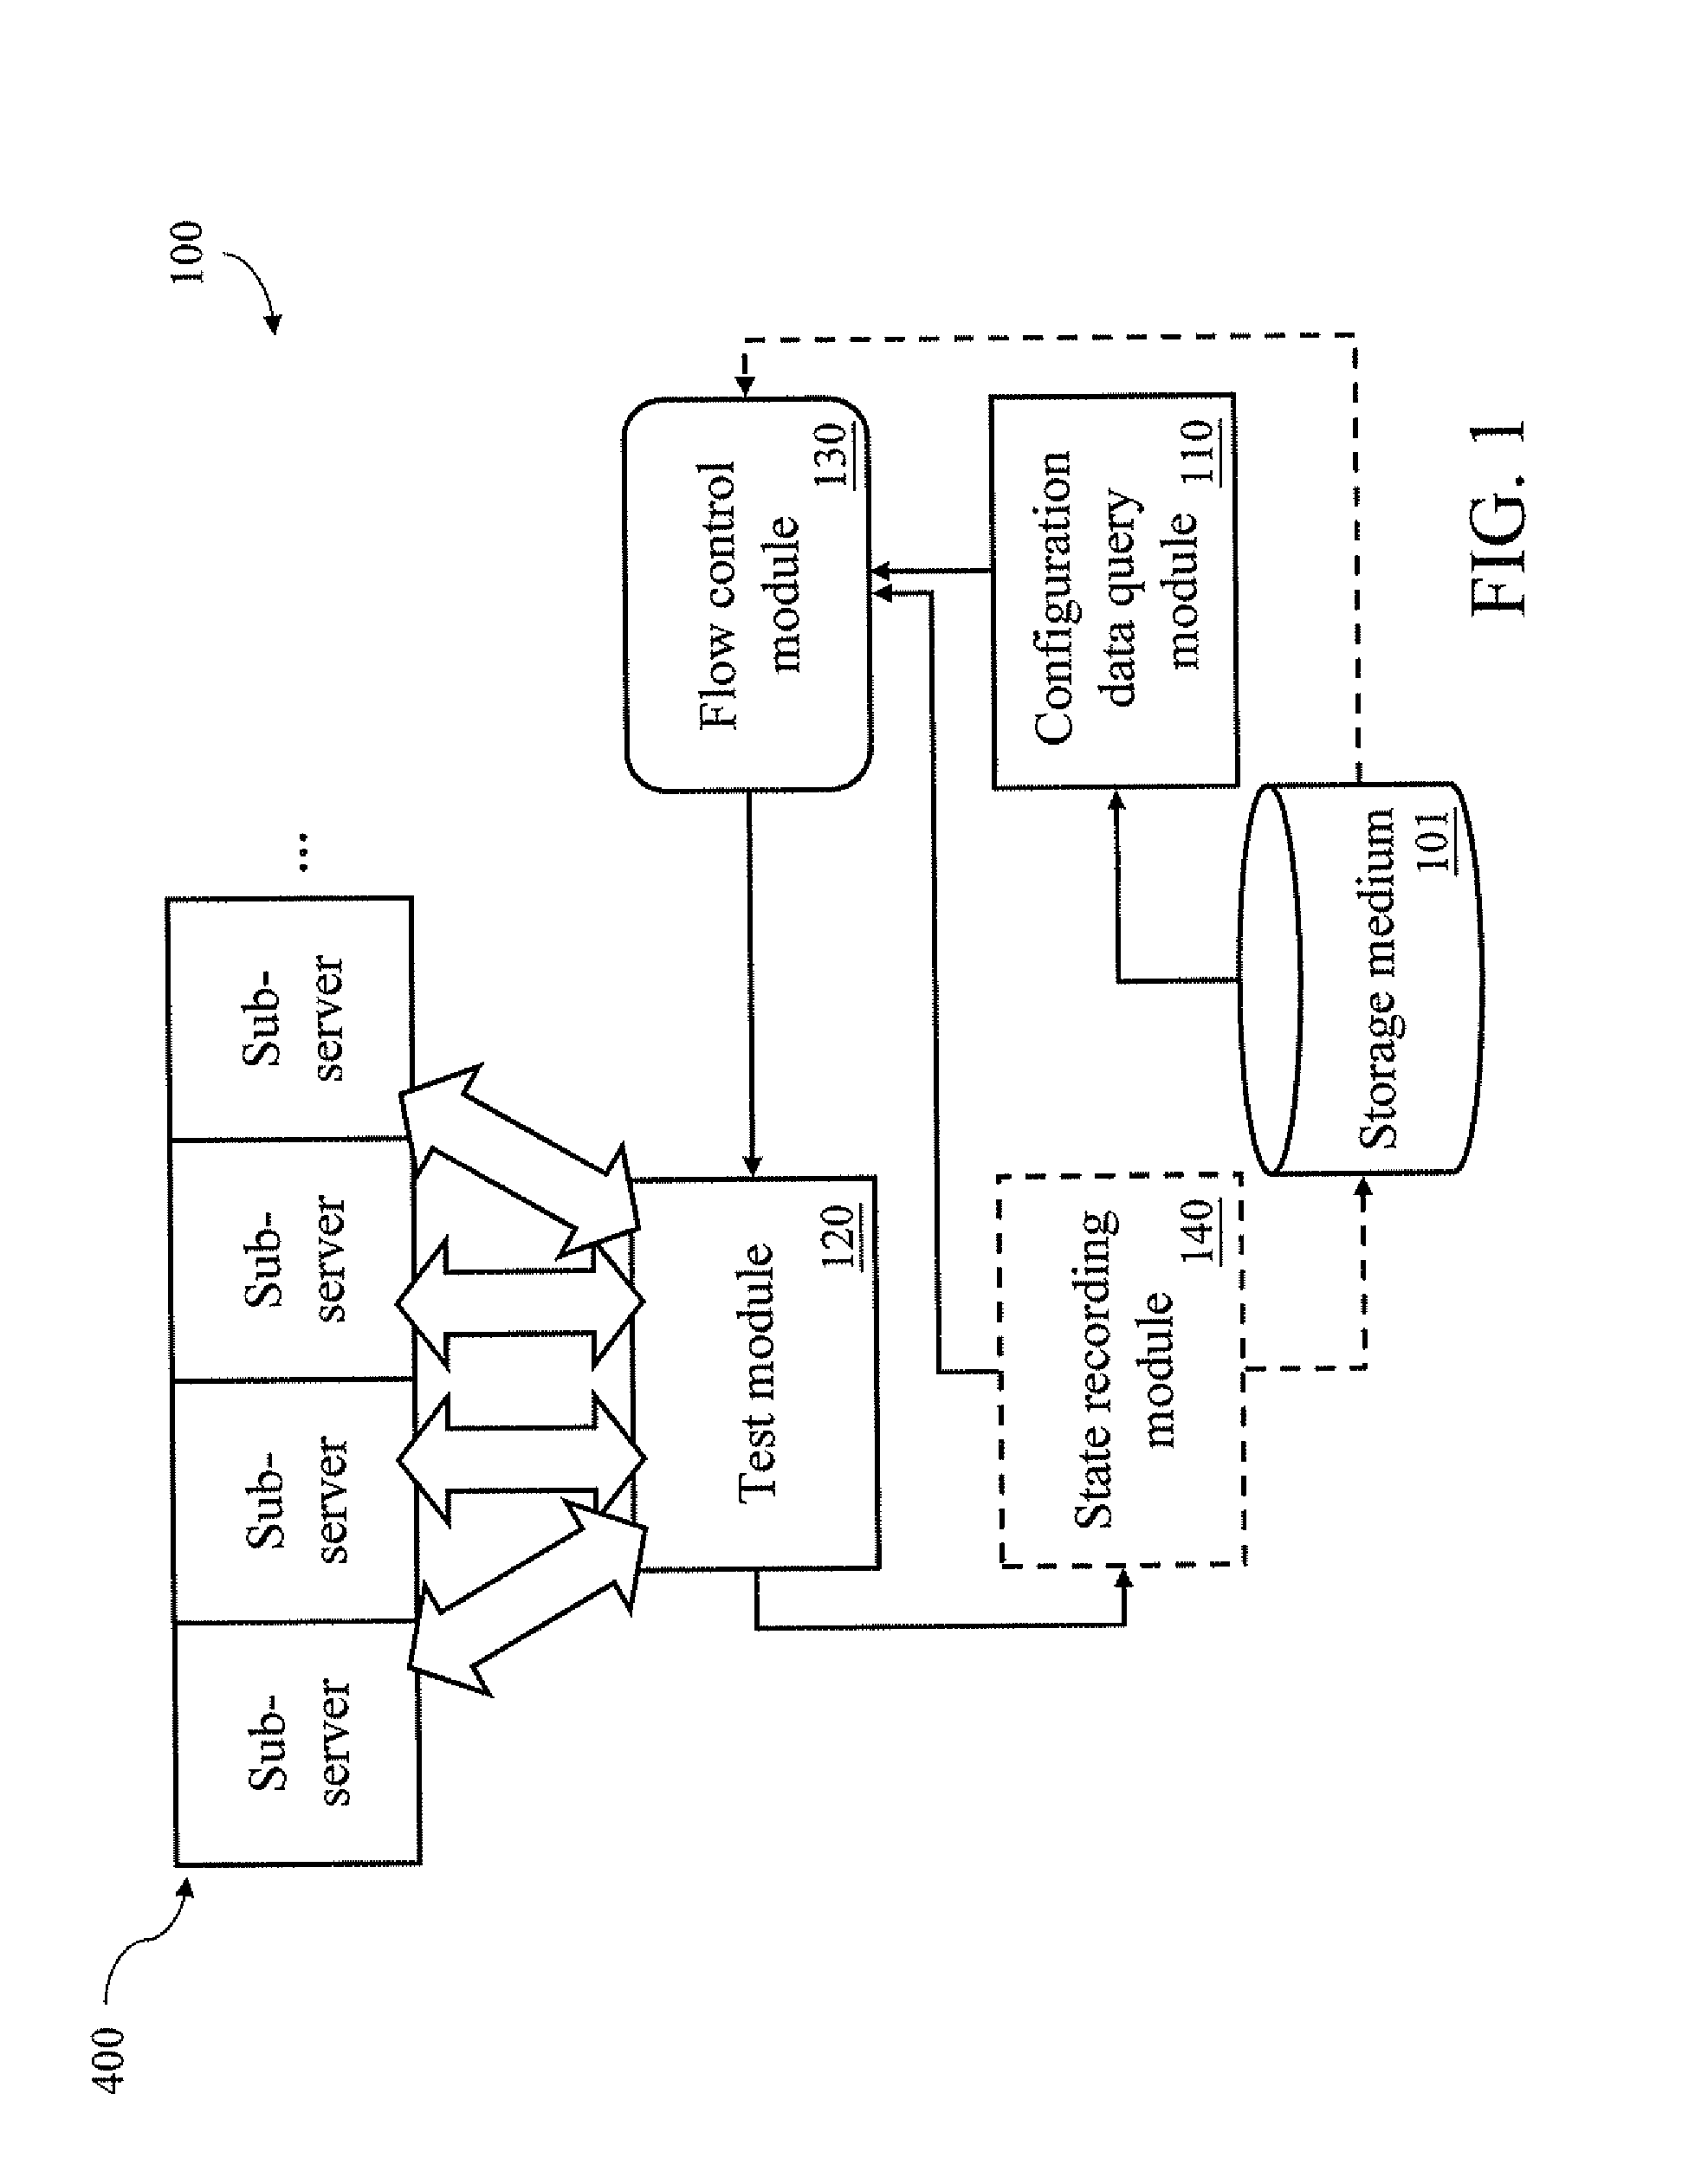 System and method for testing sub-servers through plurality of test phases